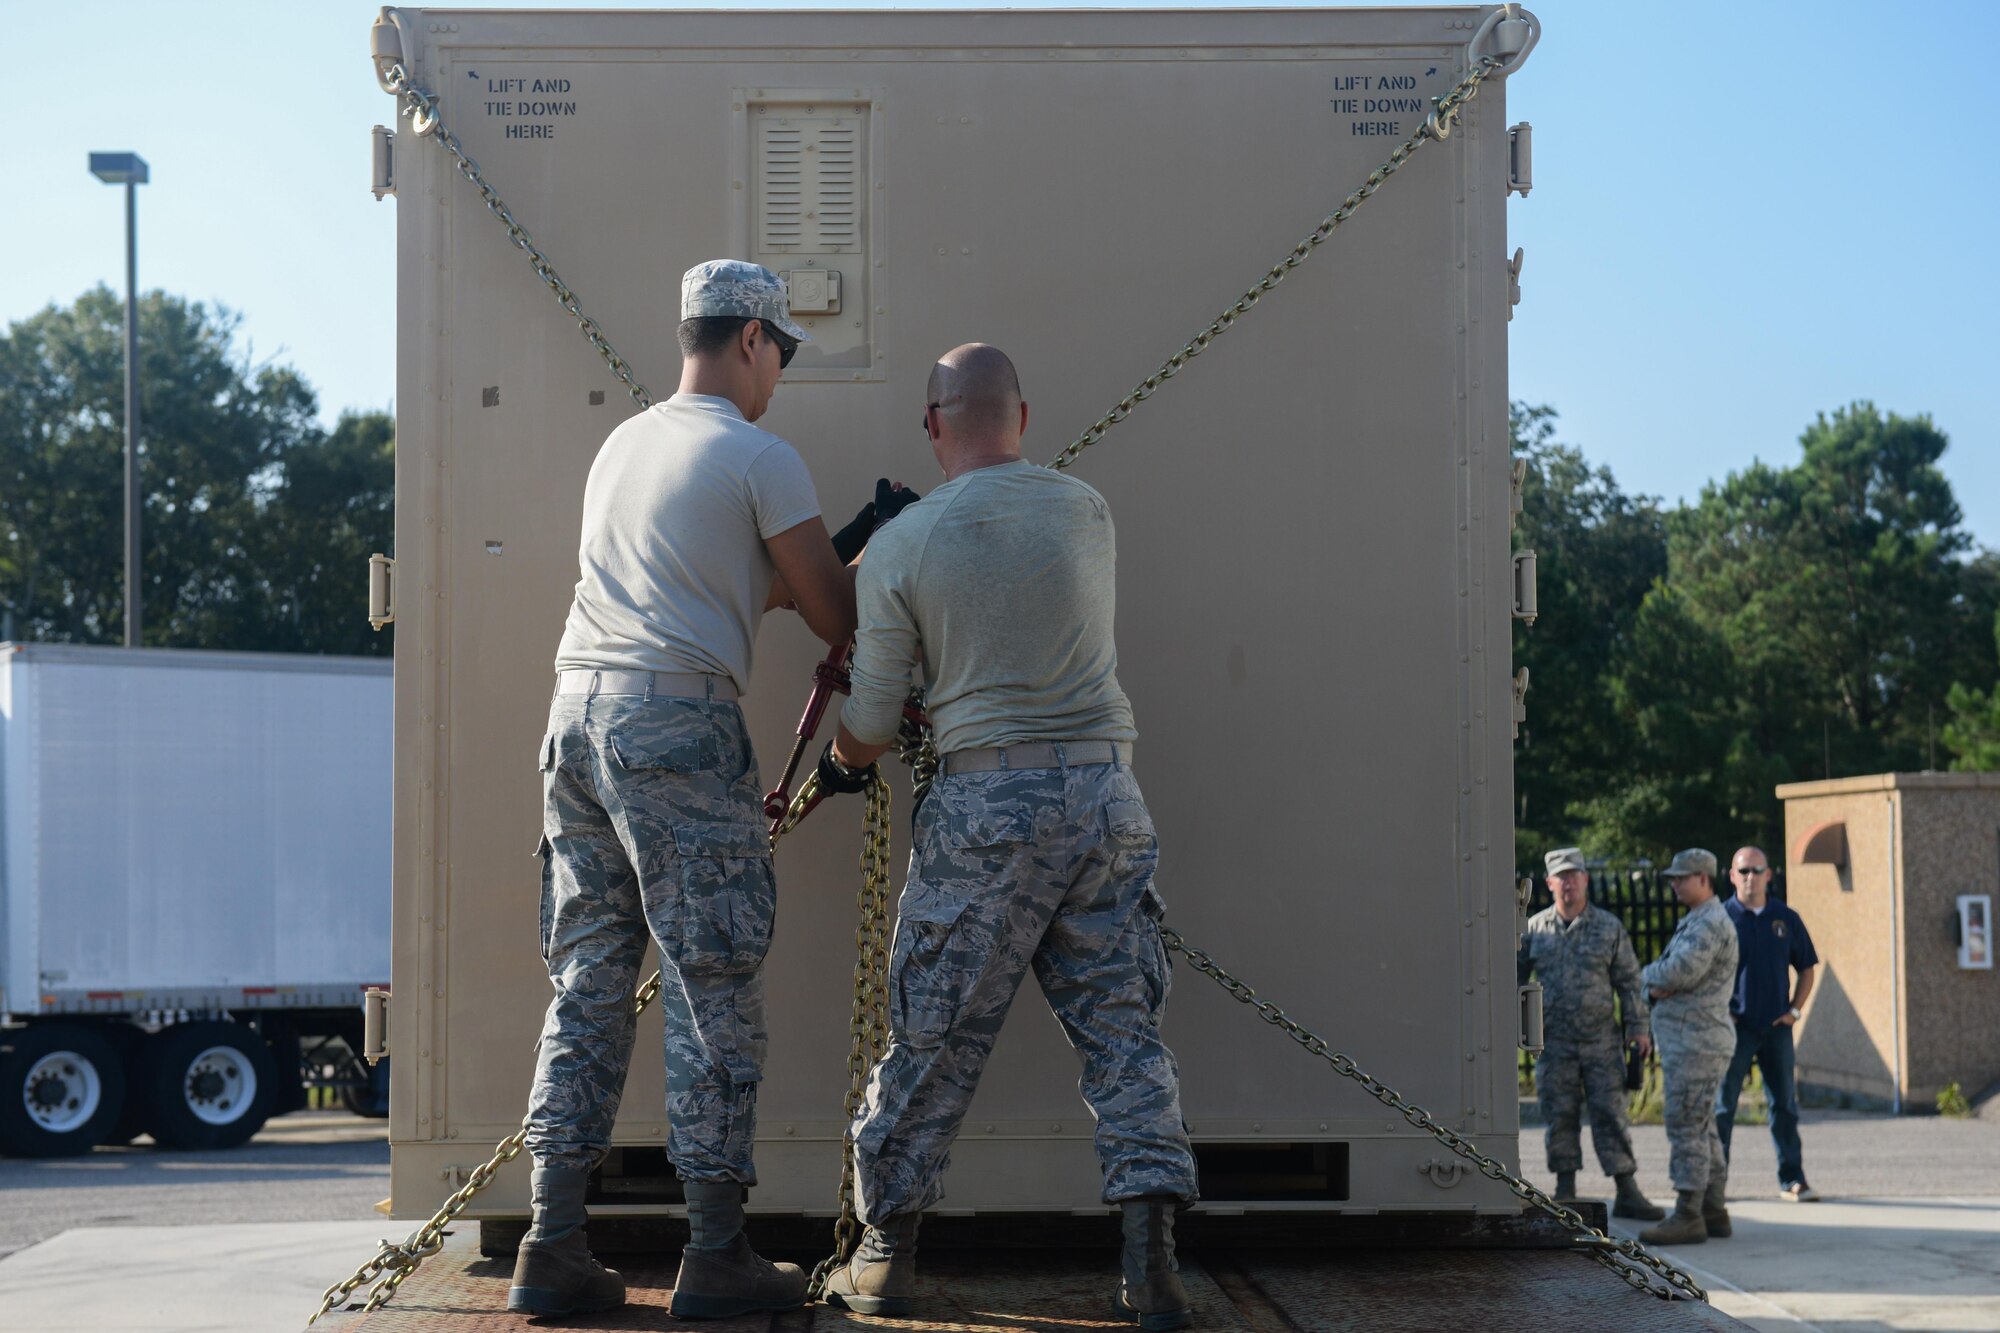 Senior Airman Christian Bonenberger, 85th Engineering Installation Squadron material control manager and Staff Sgt. Victor Mancaruso, 85th EIS vehicle operator, secure a cargo container for a deployment to aid Puerto Rico at the 85th EIS Vehicle Operations building on Keesler Air Force Base, Mississippi. In the wake of Hurricane Maria, Puerto Rico’s land mobile radio communications infrastructure for first responders are in dire need of repair and the 85th EIS were requested by name to help get it back up and running. (U.S. Air Force photo by Senior Airman Travis Beihl)